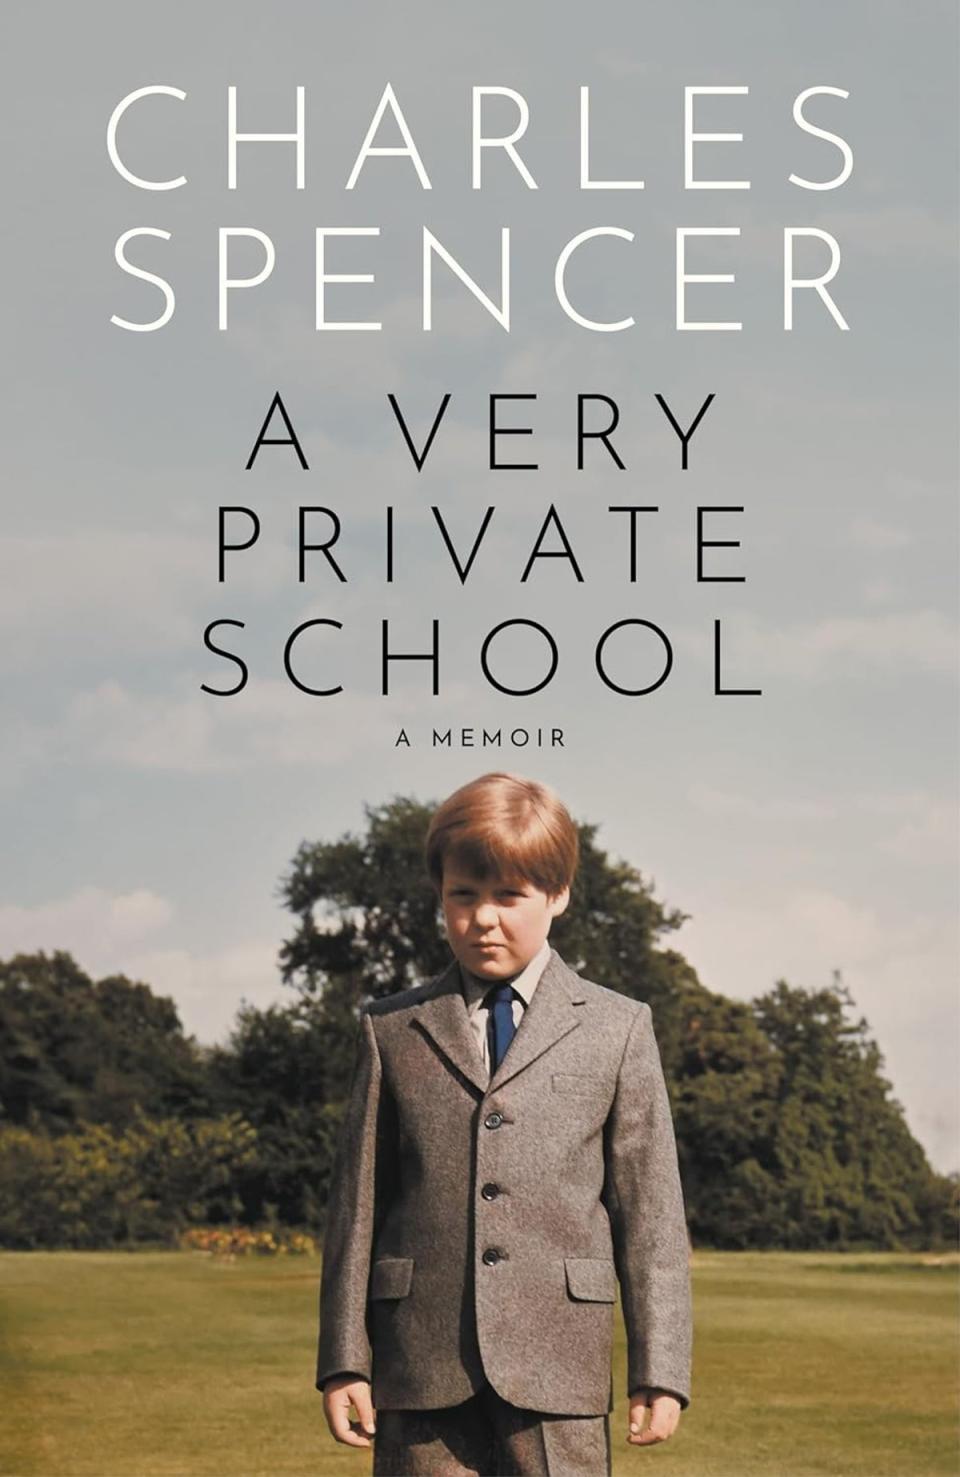 Whisked away: Charles Spencer’s new book will explore the antiquated nature of the boarding school system (Source)